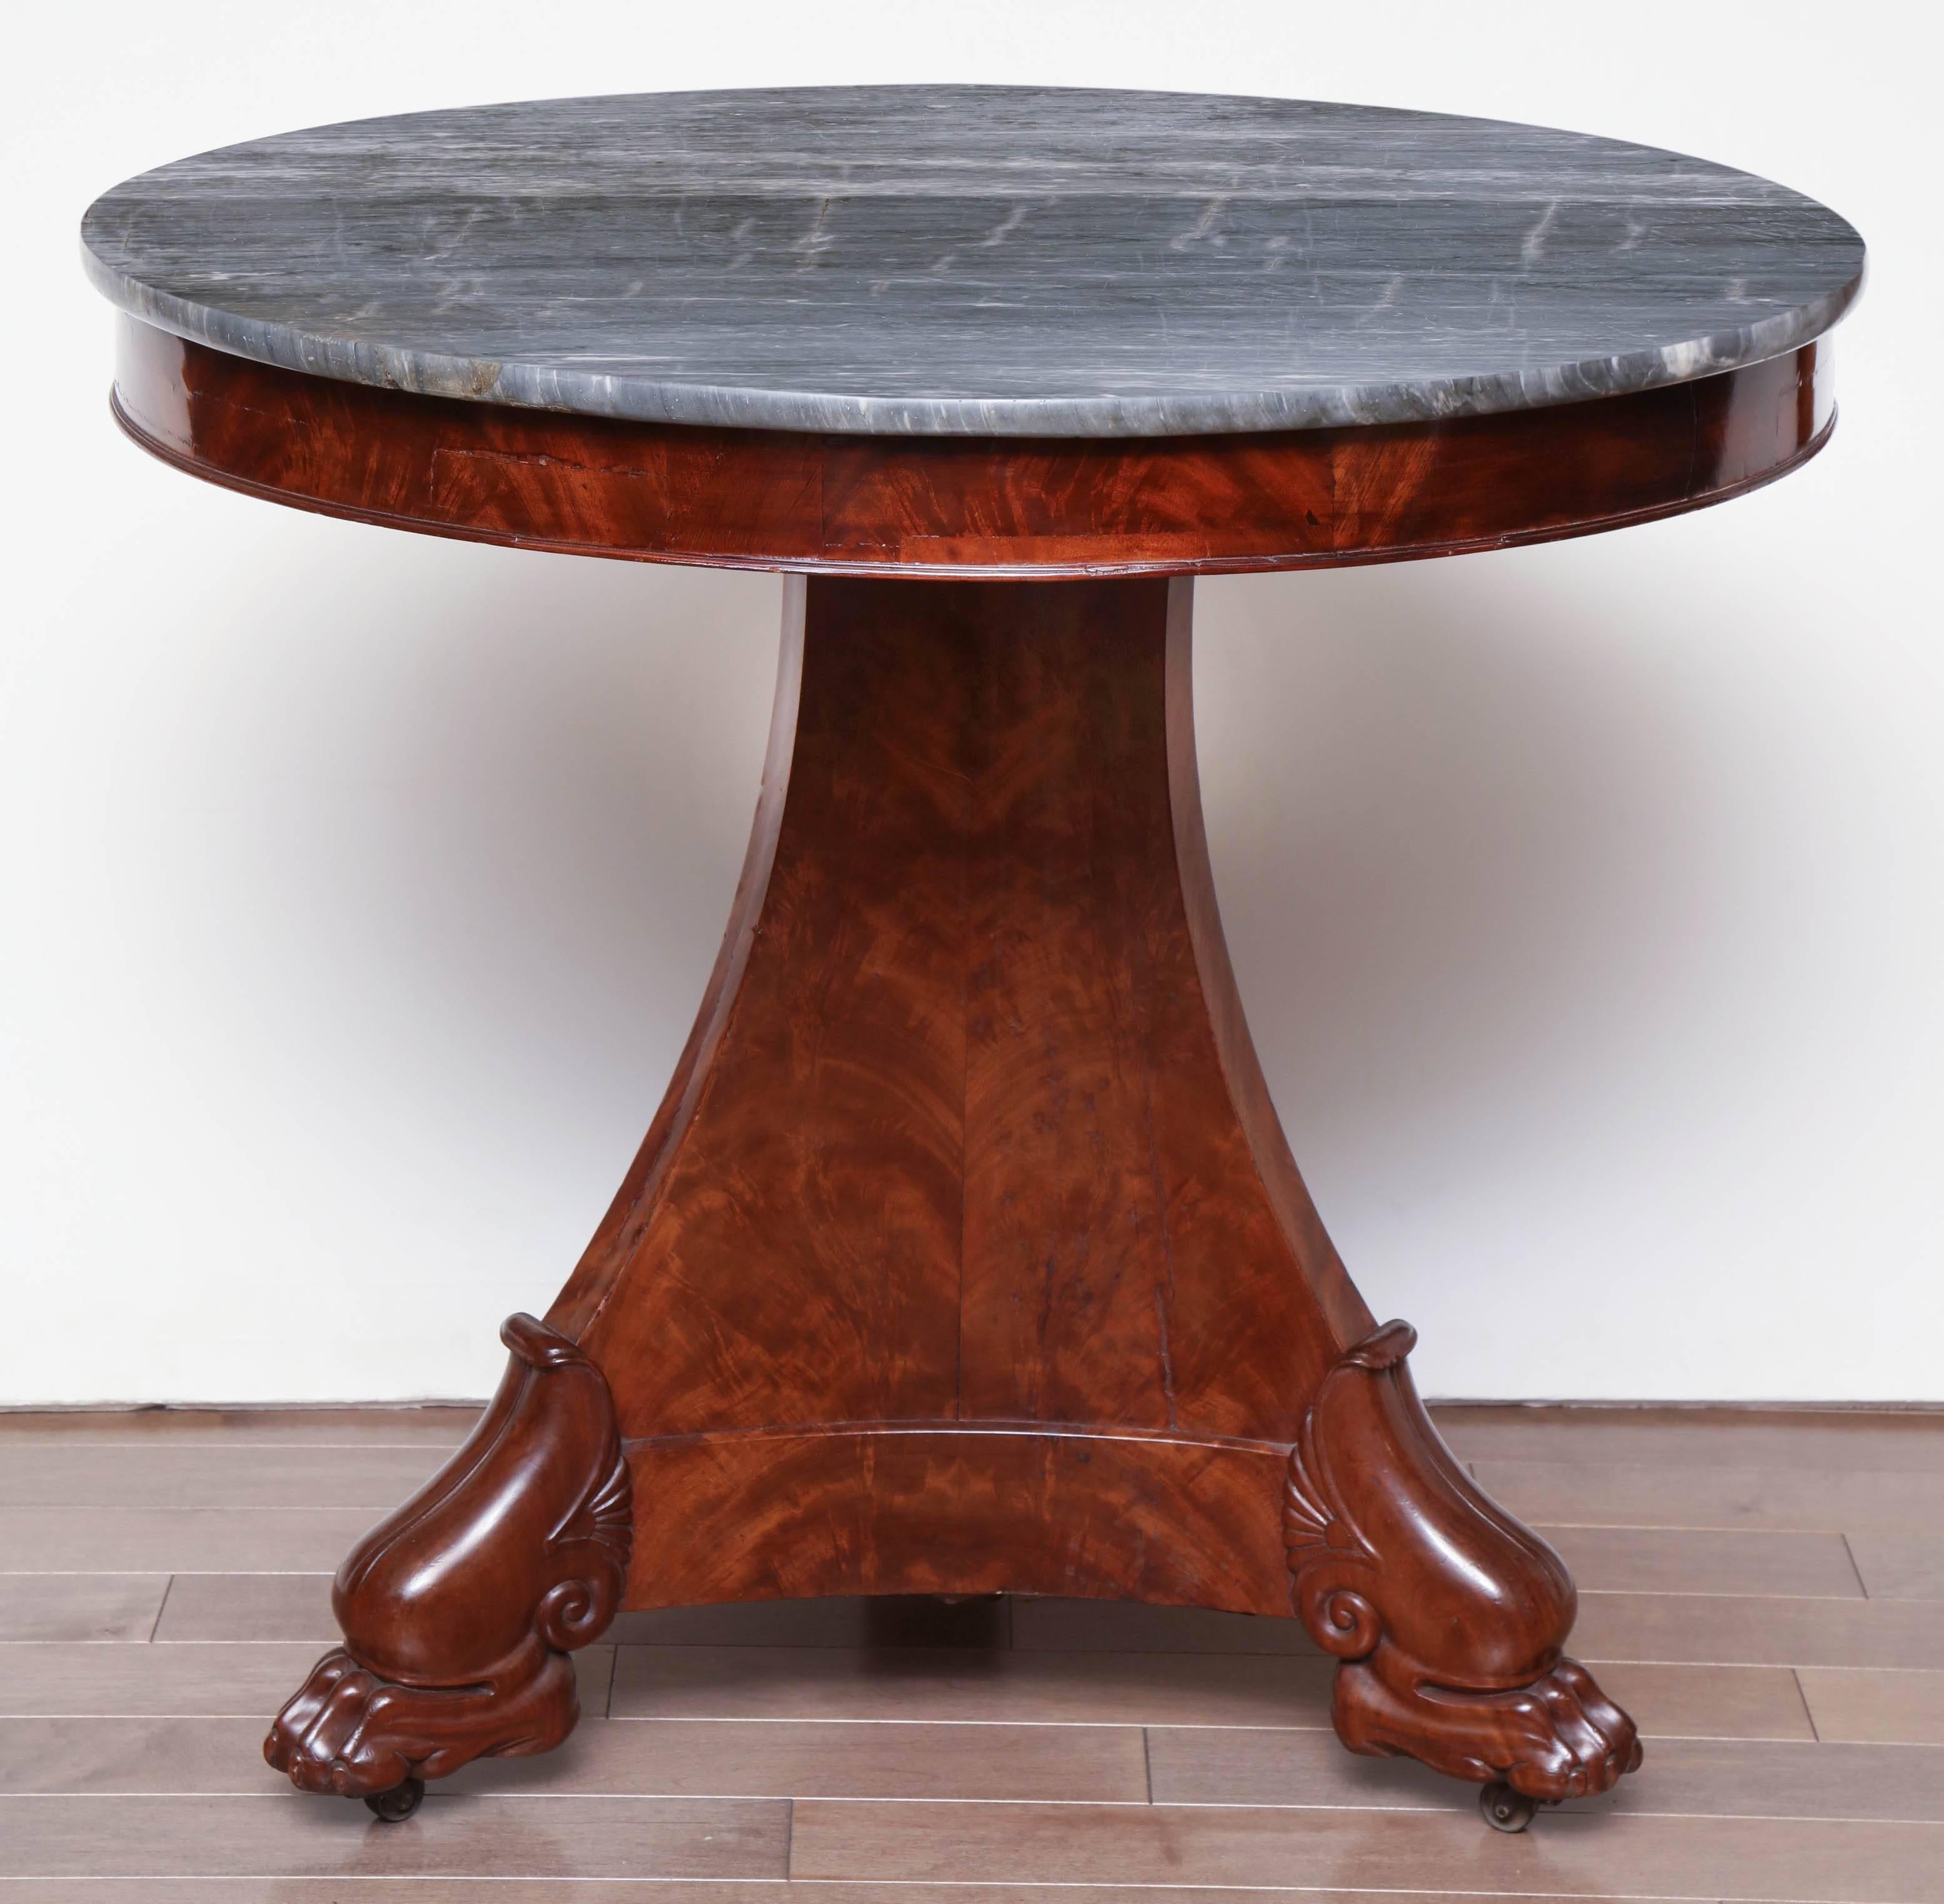 Early 19th century French, mahogany table with grey marble top.